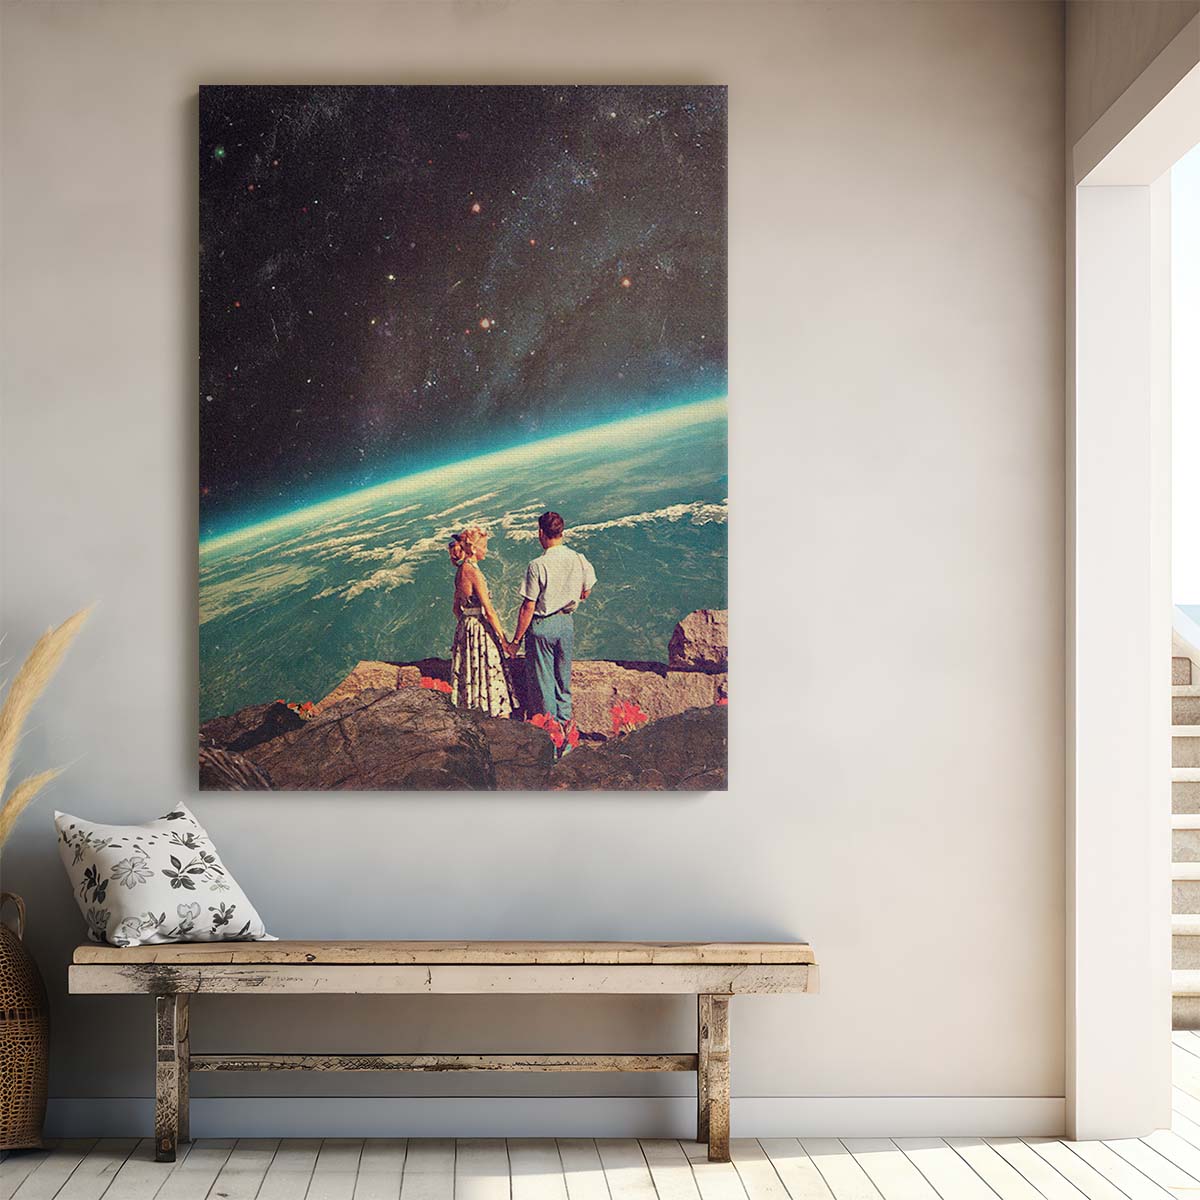 Romantic Galaxy Love Collage Illustration by Frank Moth by Luxuriance Designs, made in USA